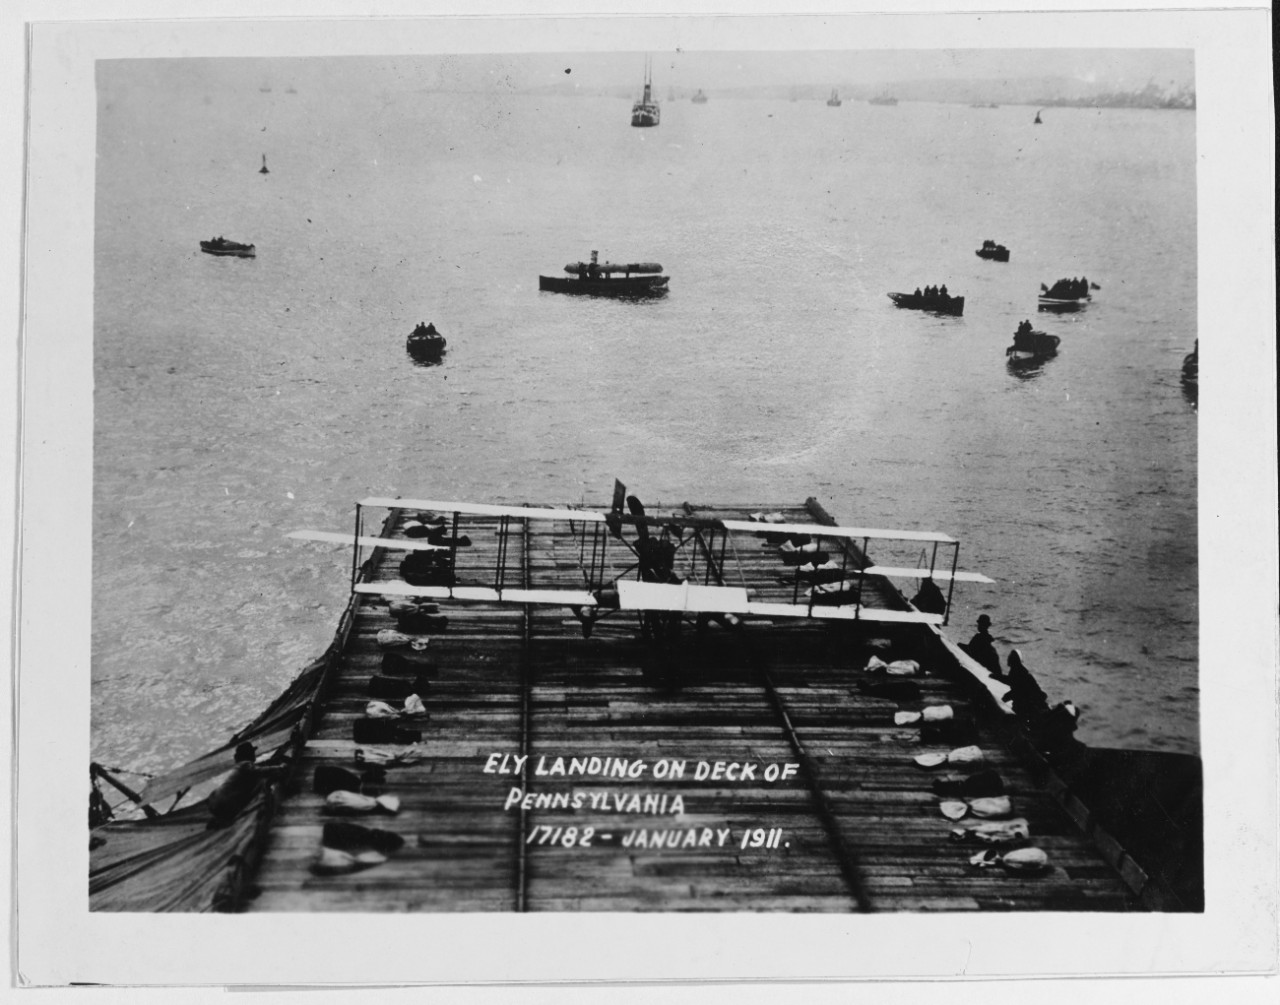 Photo #: NH 77607  First airplane landing on a warship, 18 January 1911